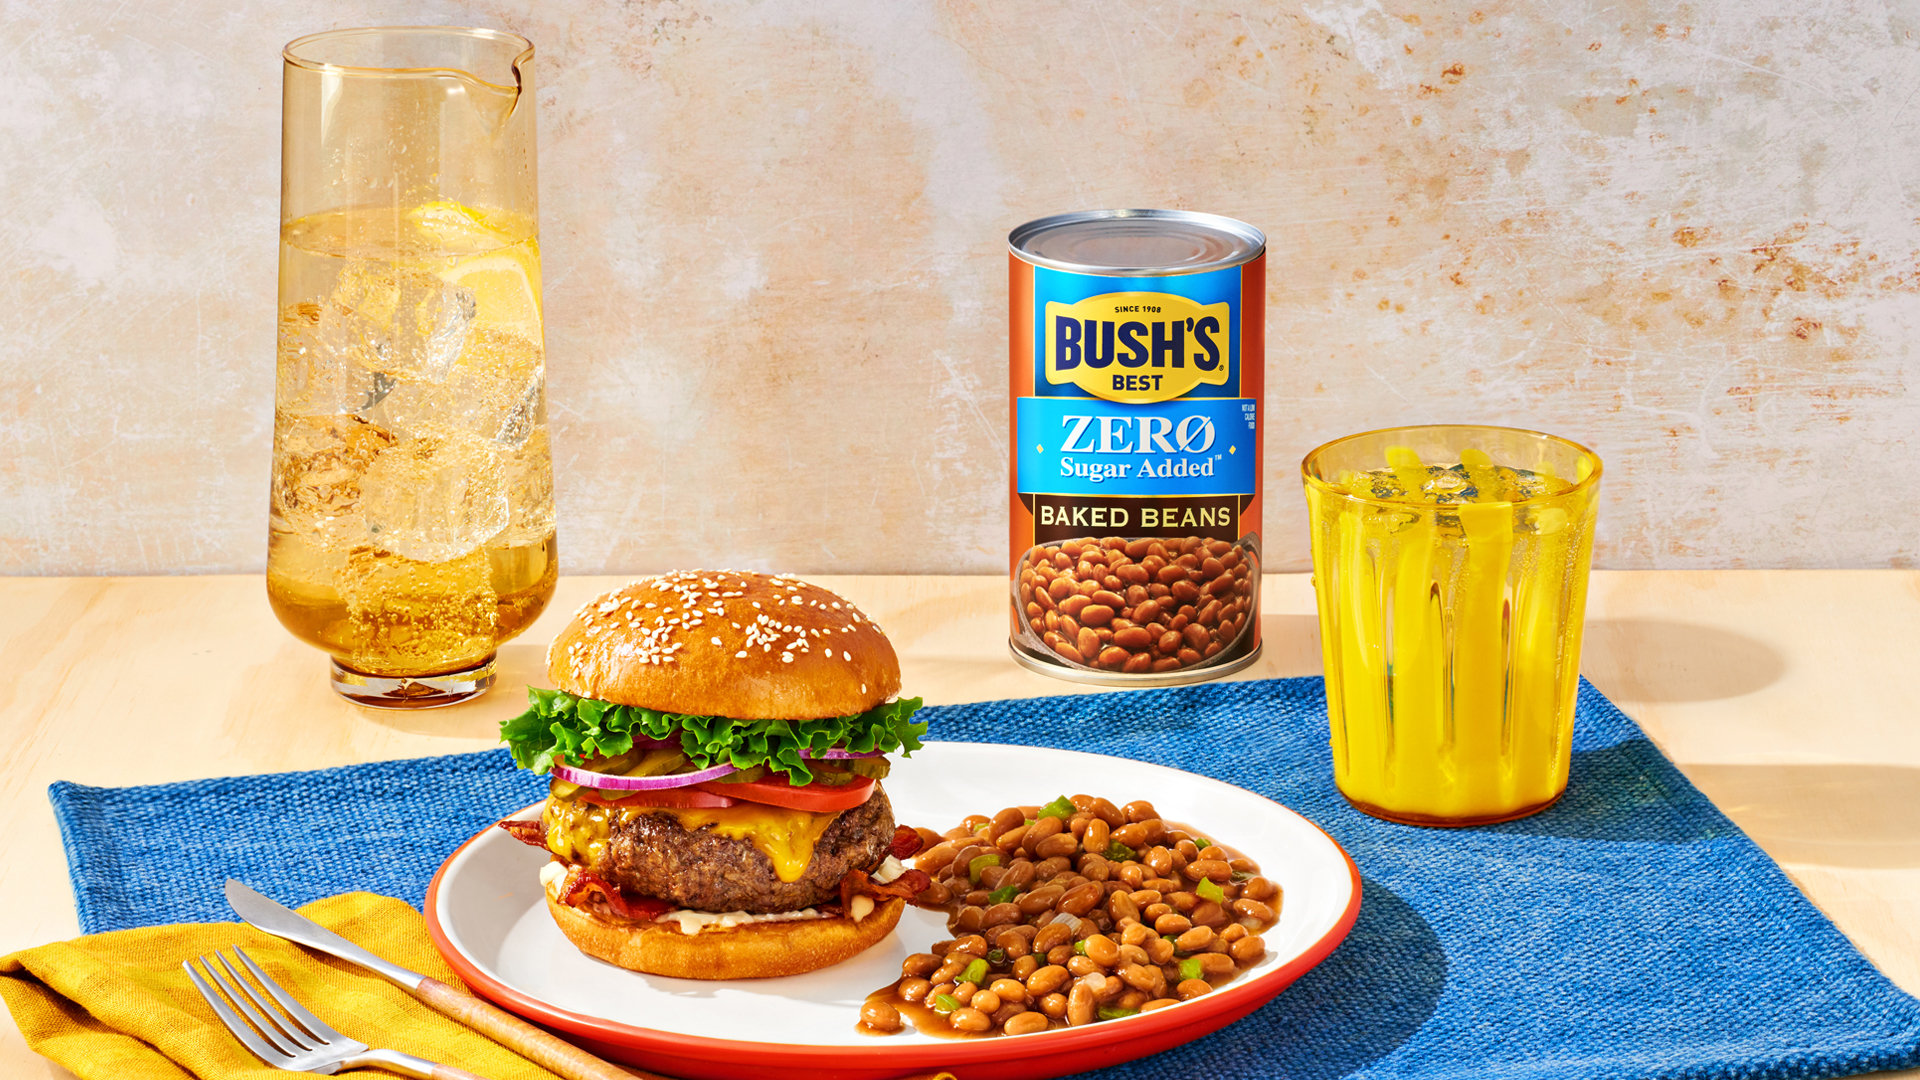 A plate with a burger and baked beans with a can of Bush's Zero Sugar Added Baked Beans on a picnic table.